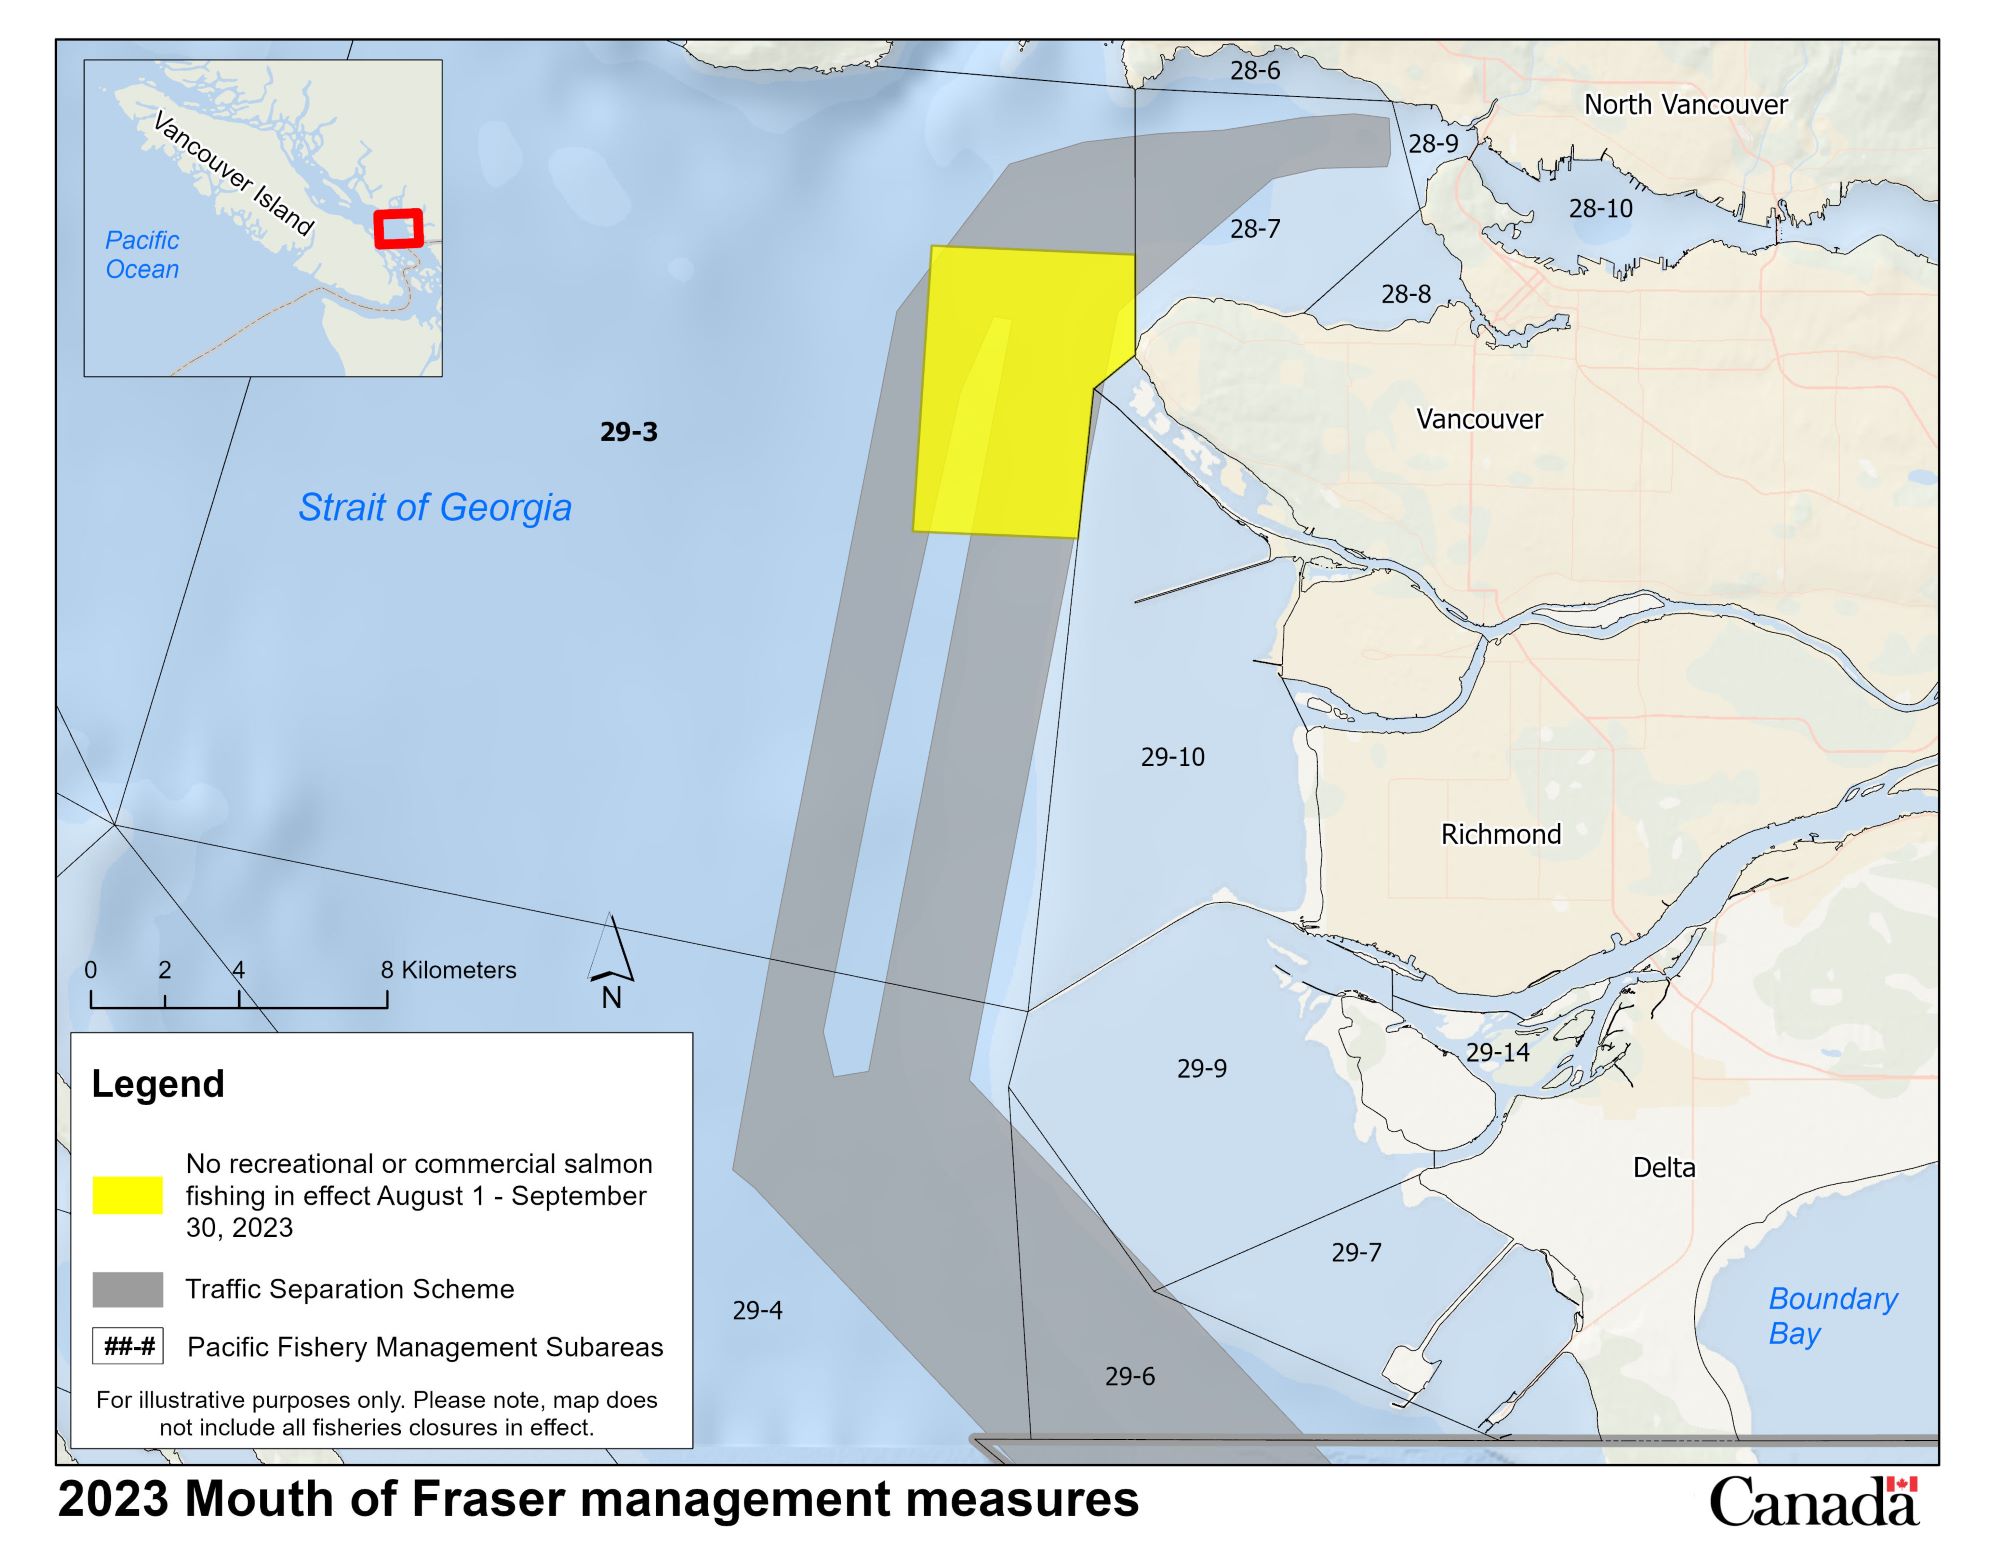 Map of management measures in the Mouth of the Fraser River to support Southern Resident killer whale recovery